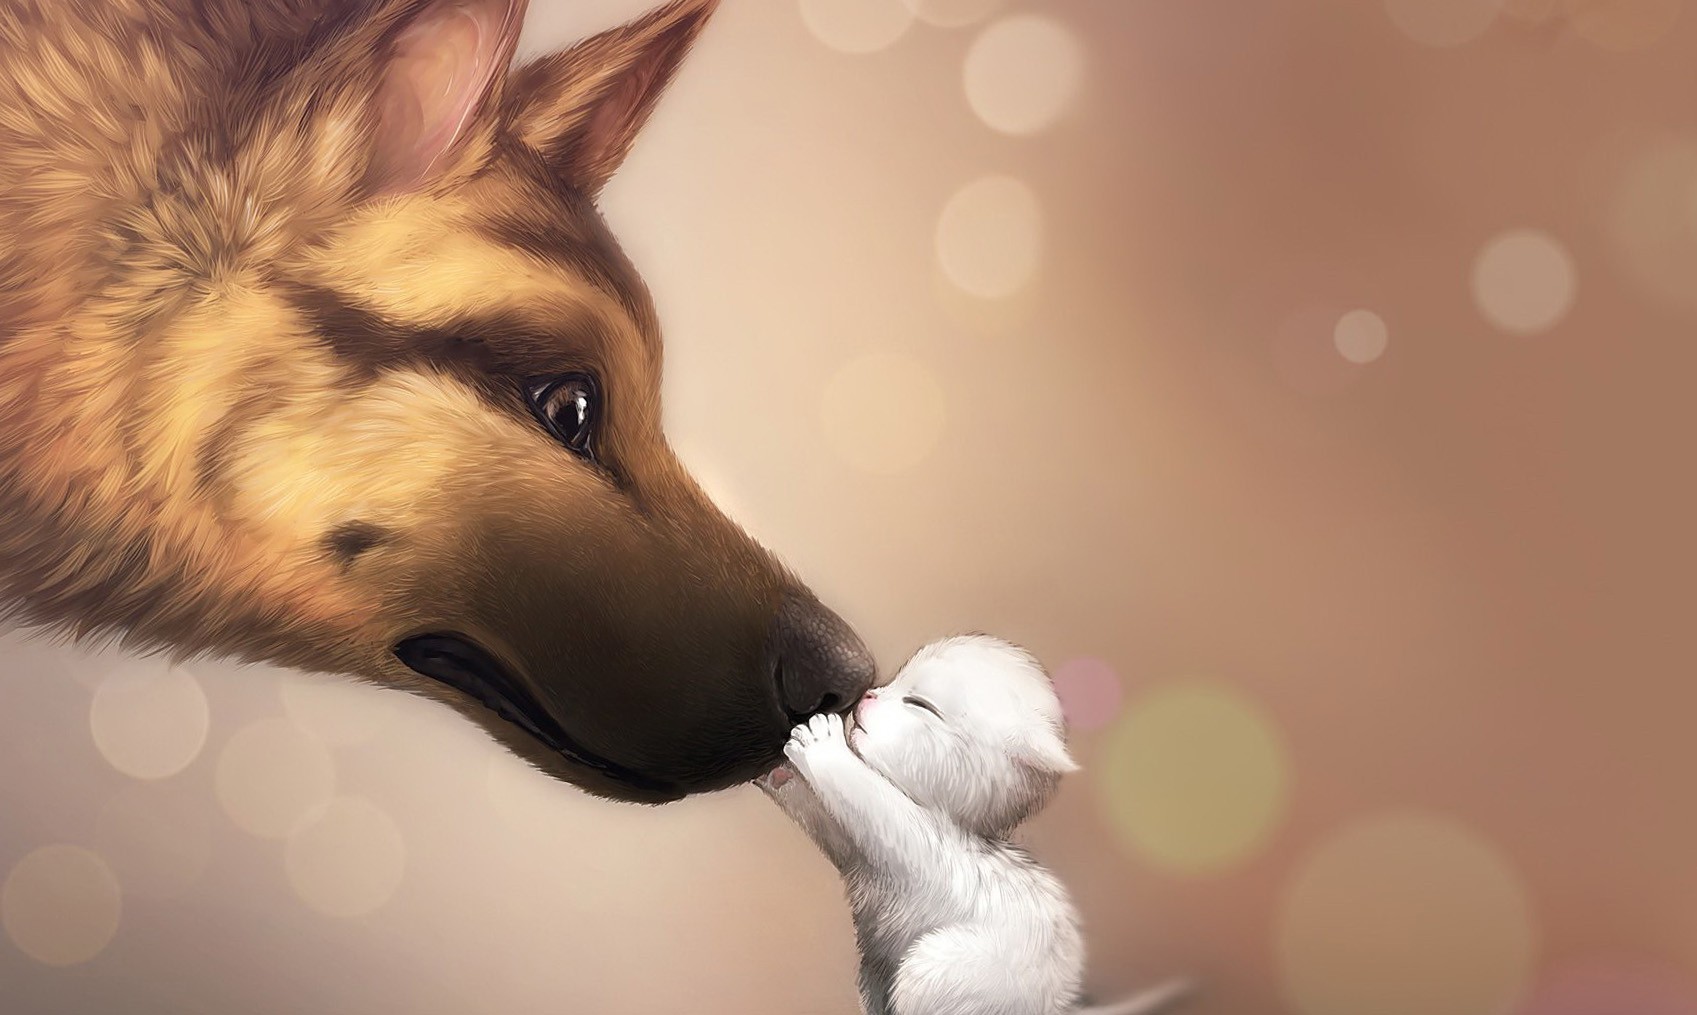 Dog Wallpaper, Cool Dogs, Best Friend, Cute Dog Image, Anime Animals